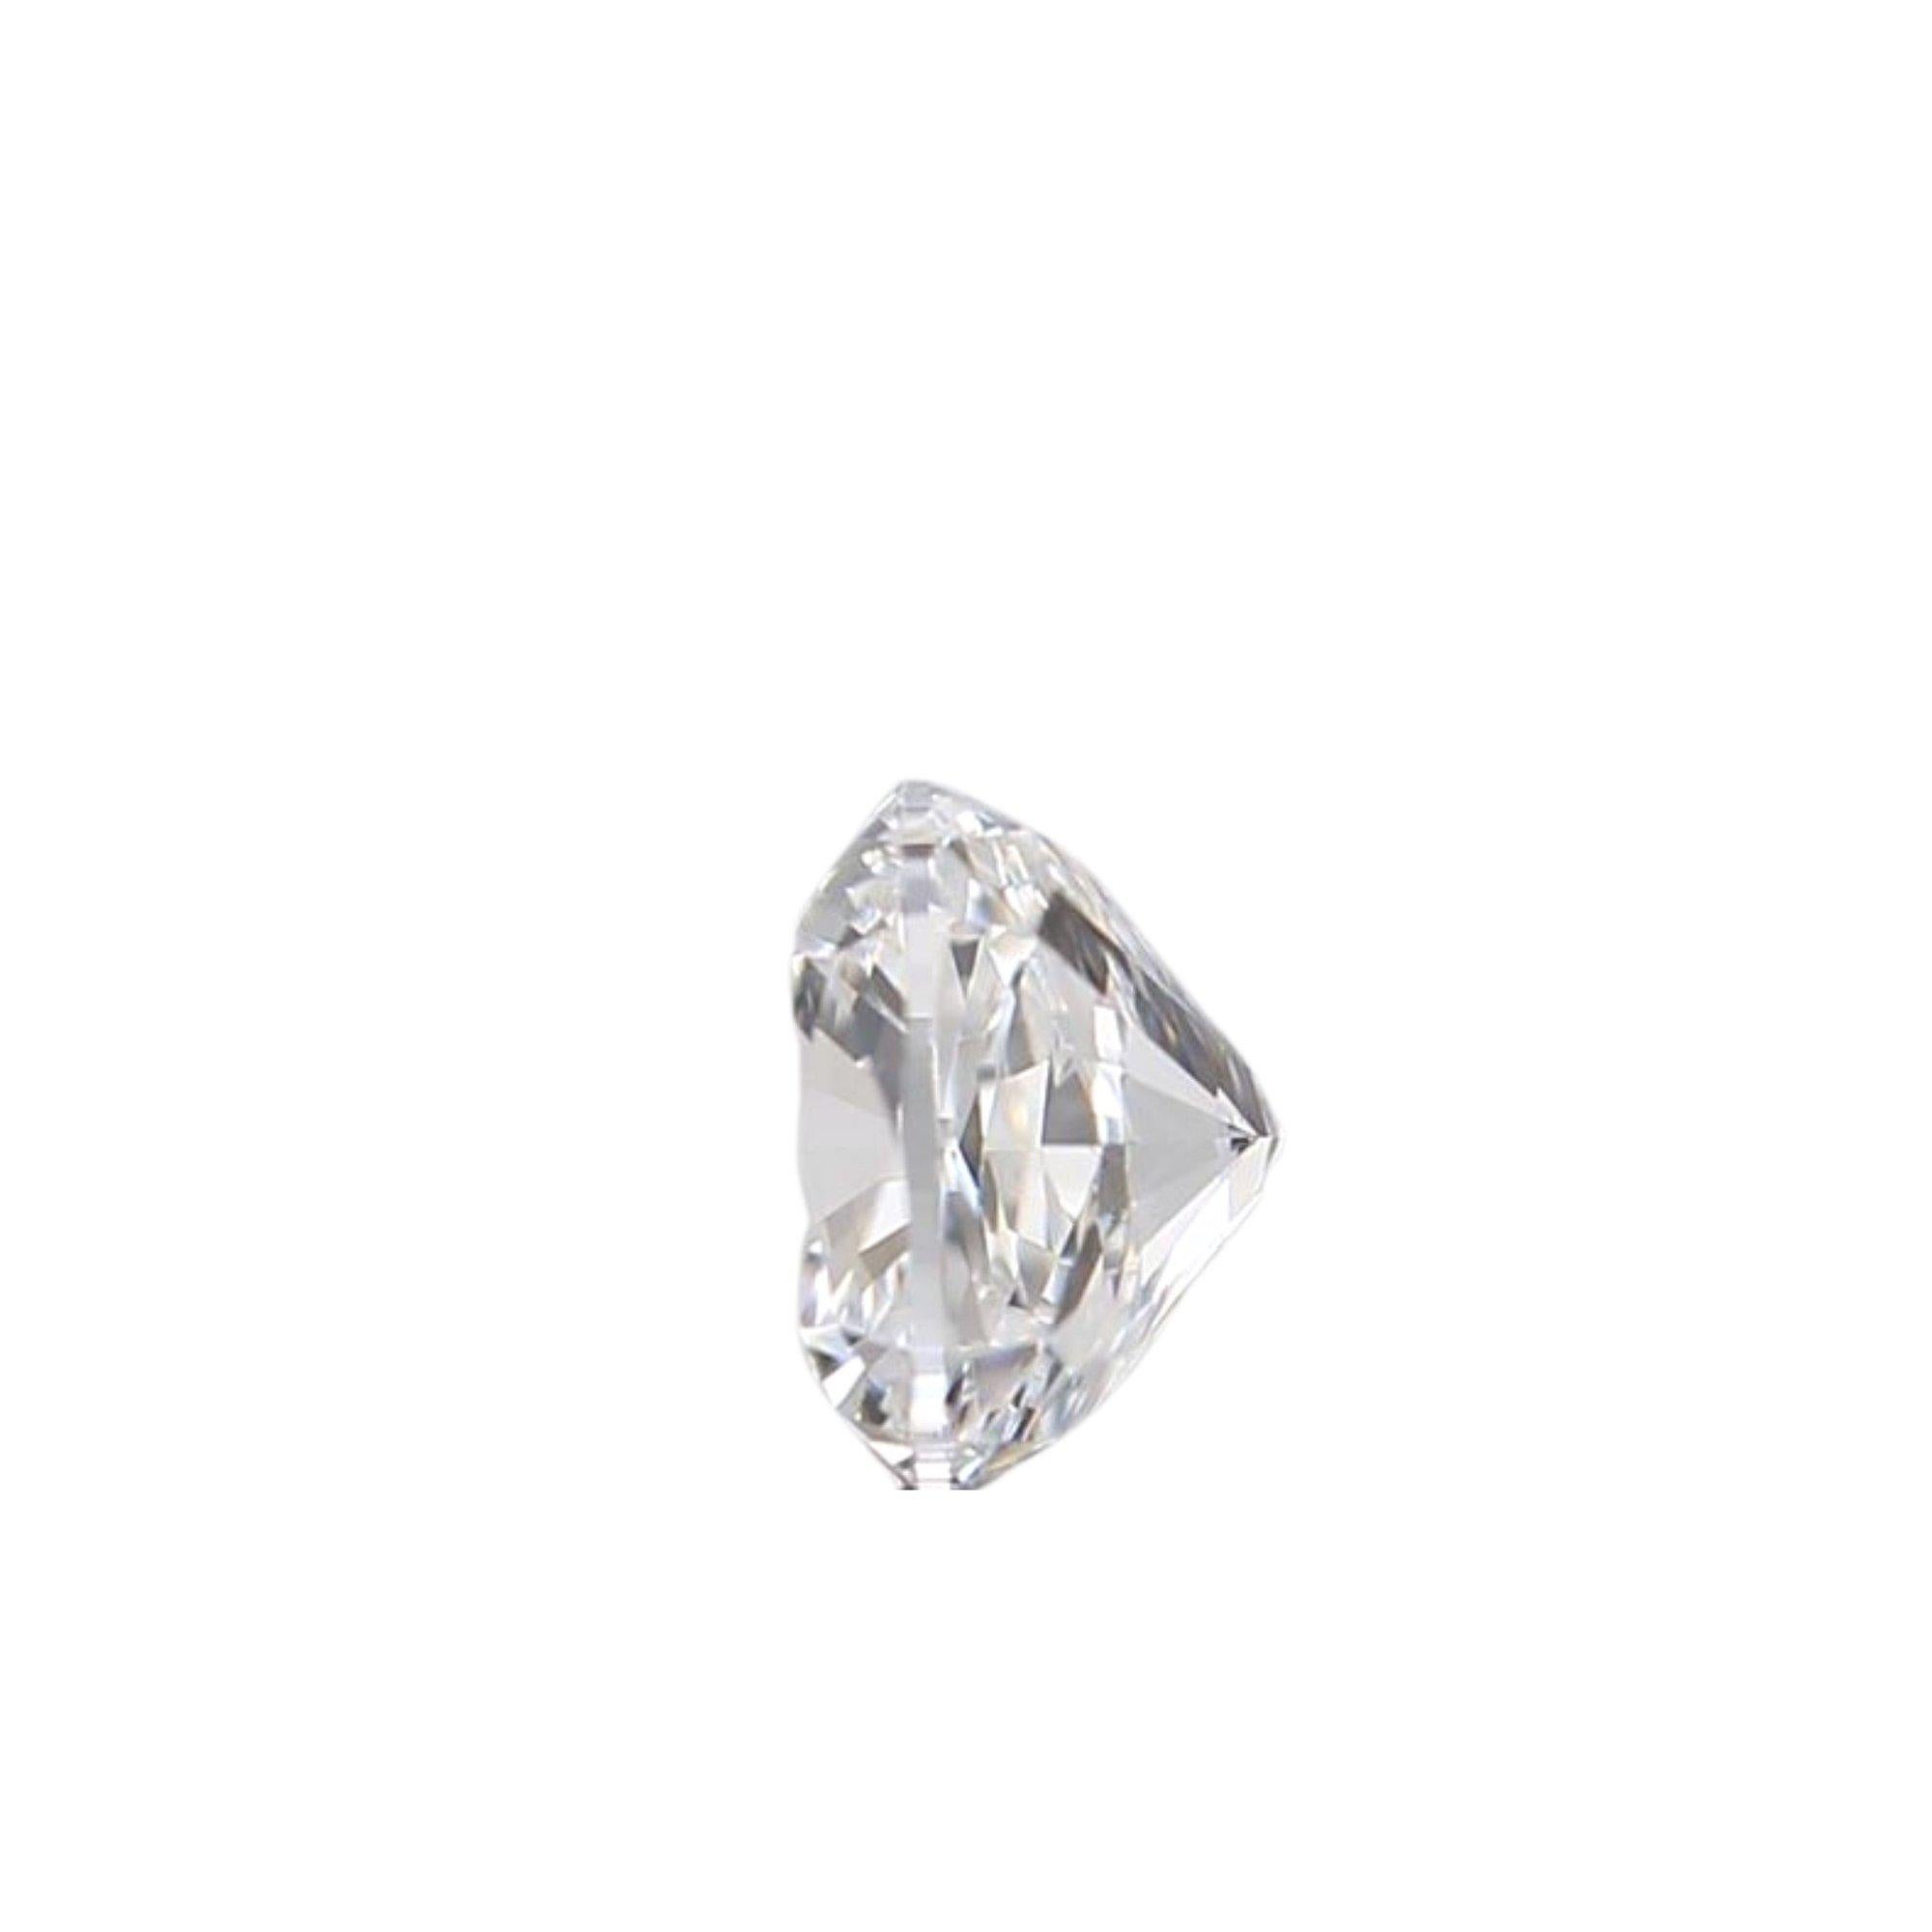 Natural cushion diamond in a 0.54 carat D IF graded by IGI Laboratory with an Excellent cut grade. This diamond comes with an IGI Certificate sealed in a security Blister and laser inscription number.

IGI 524238153

Sku: PT-996